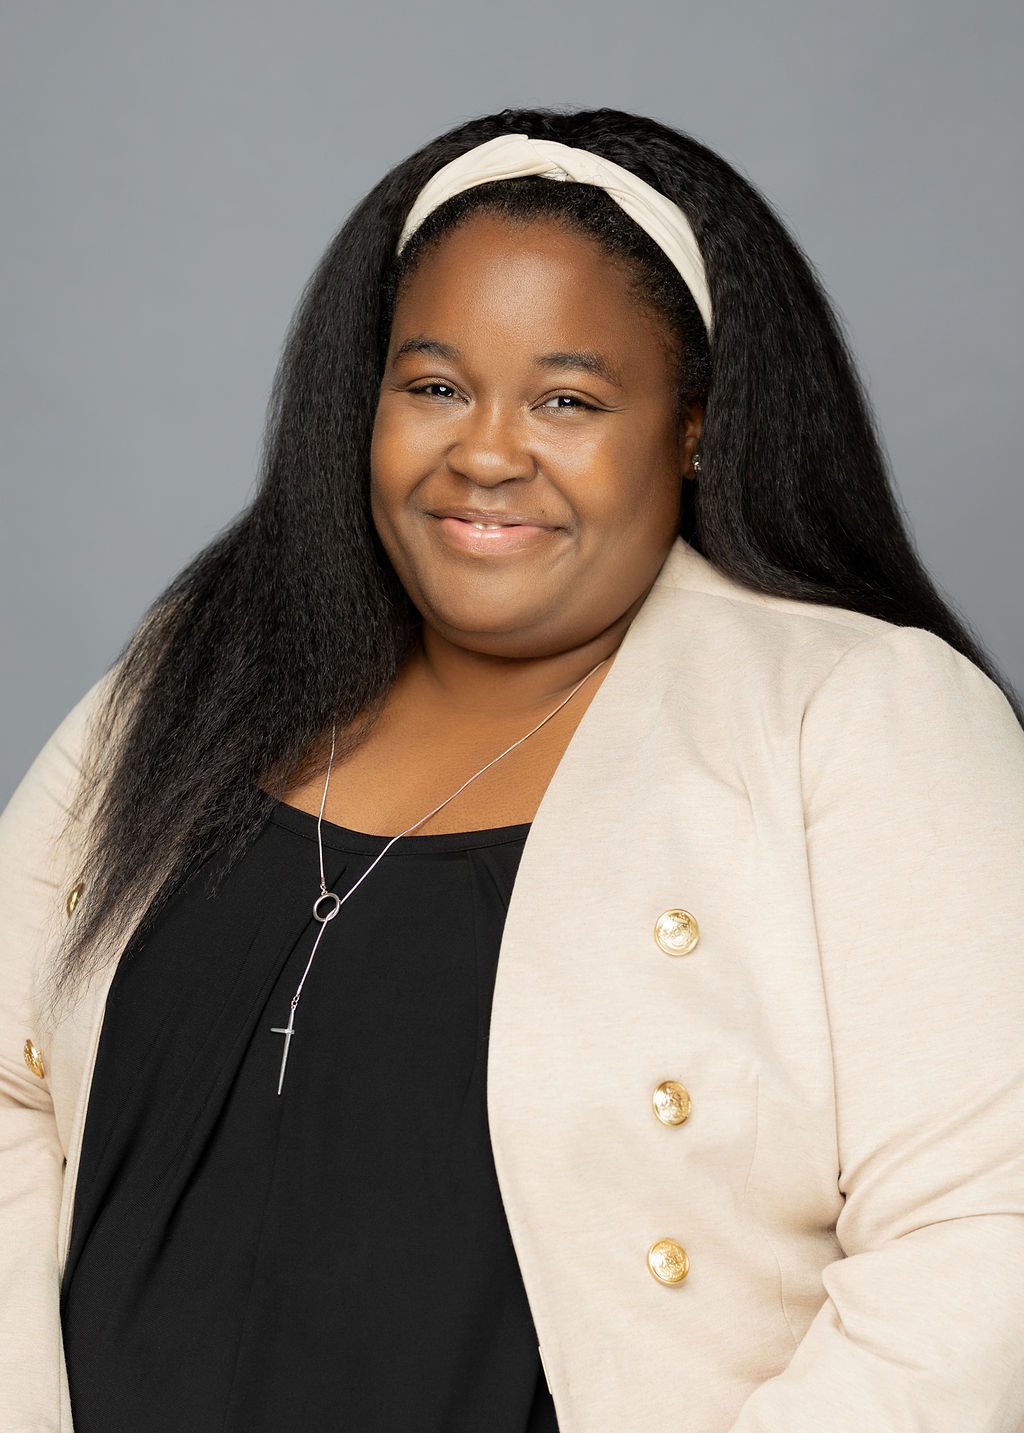 This photo is a professional headshot of Brittany Miller. She is a Black woman with long, straight black hair. In this photo, she is wearing a cream white headband that matches her cream white blazer. She is wearing a black blouse underneath the blazer and has a simple silver necklace and earrings on. She is smiling and her arms are relaxed to her sides with her hands slightly crossing in front.